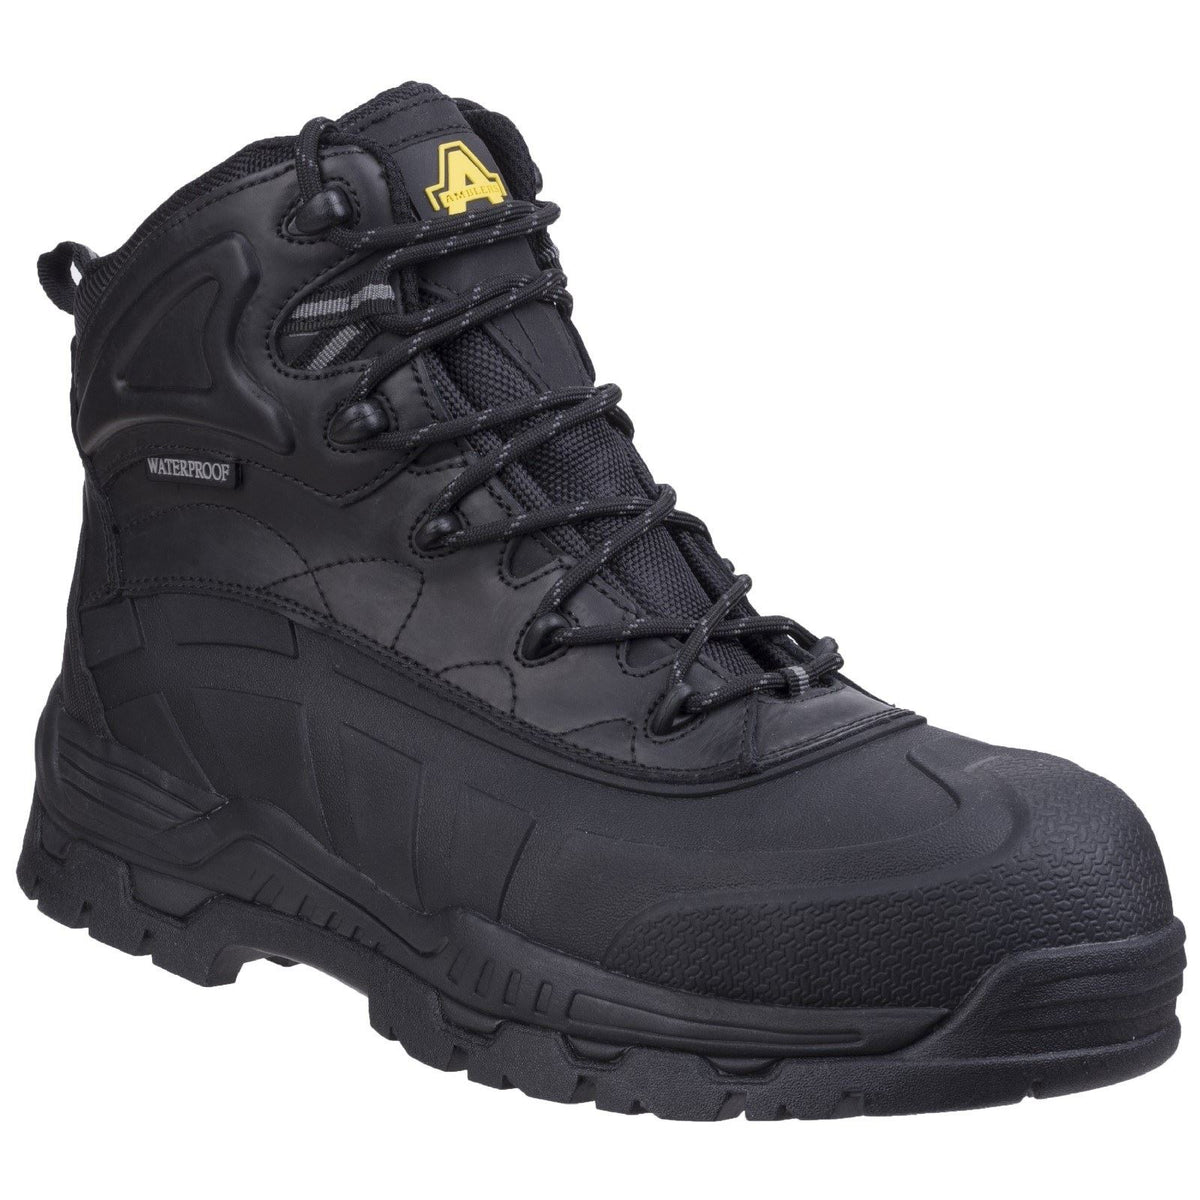 Amblers Safety FS430 Hybrid Waterproof Non-Metal Safety Boots